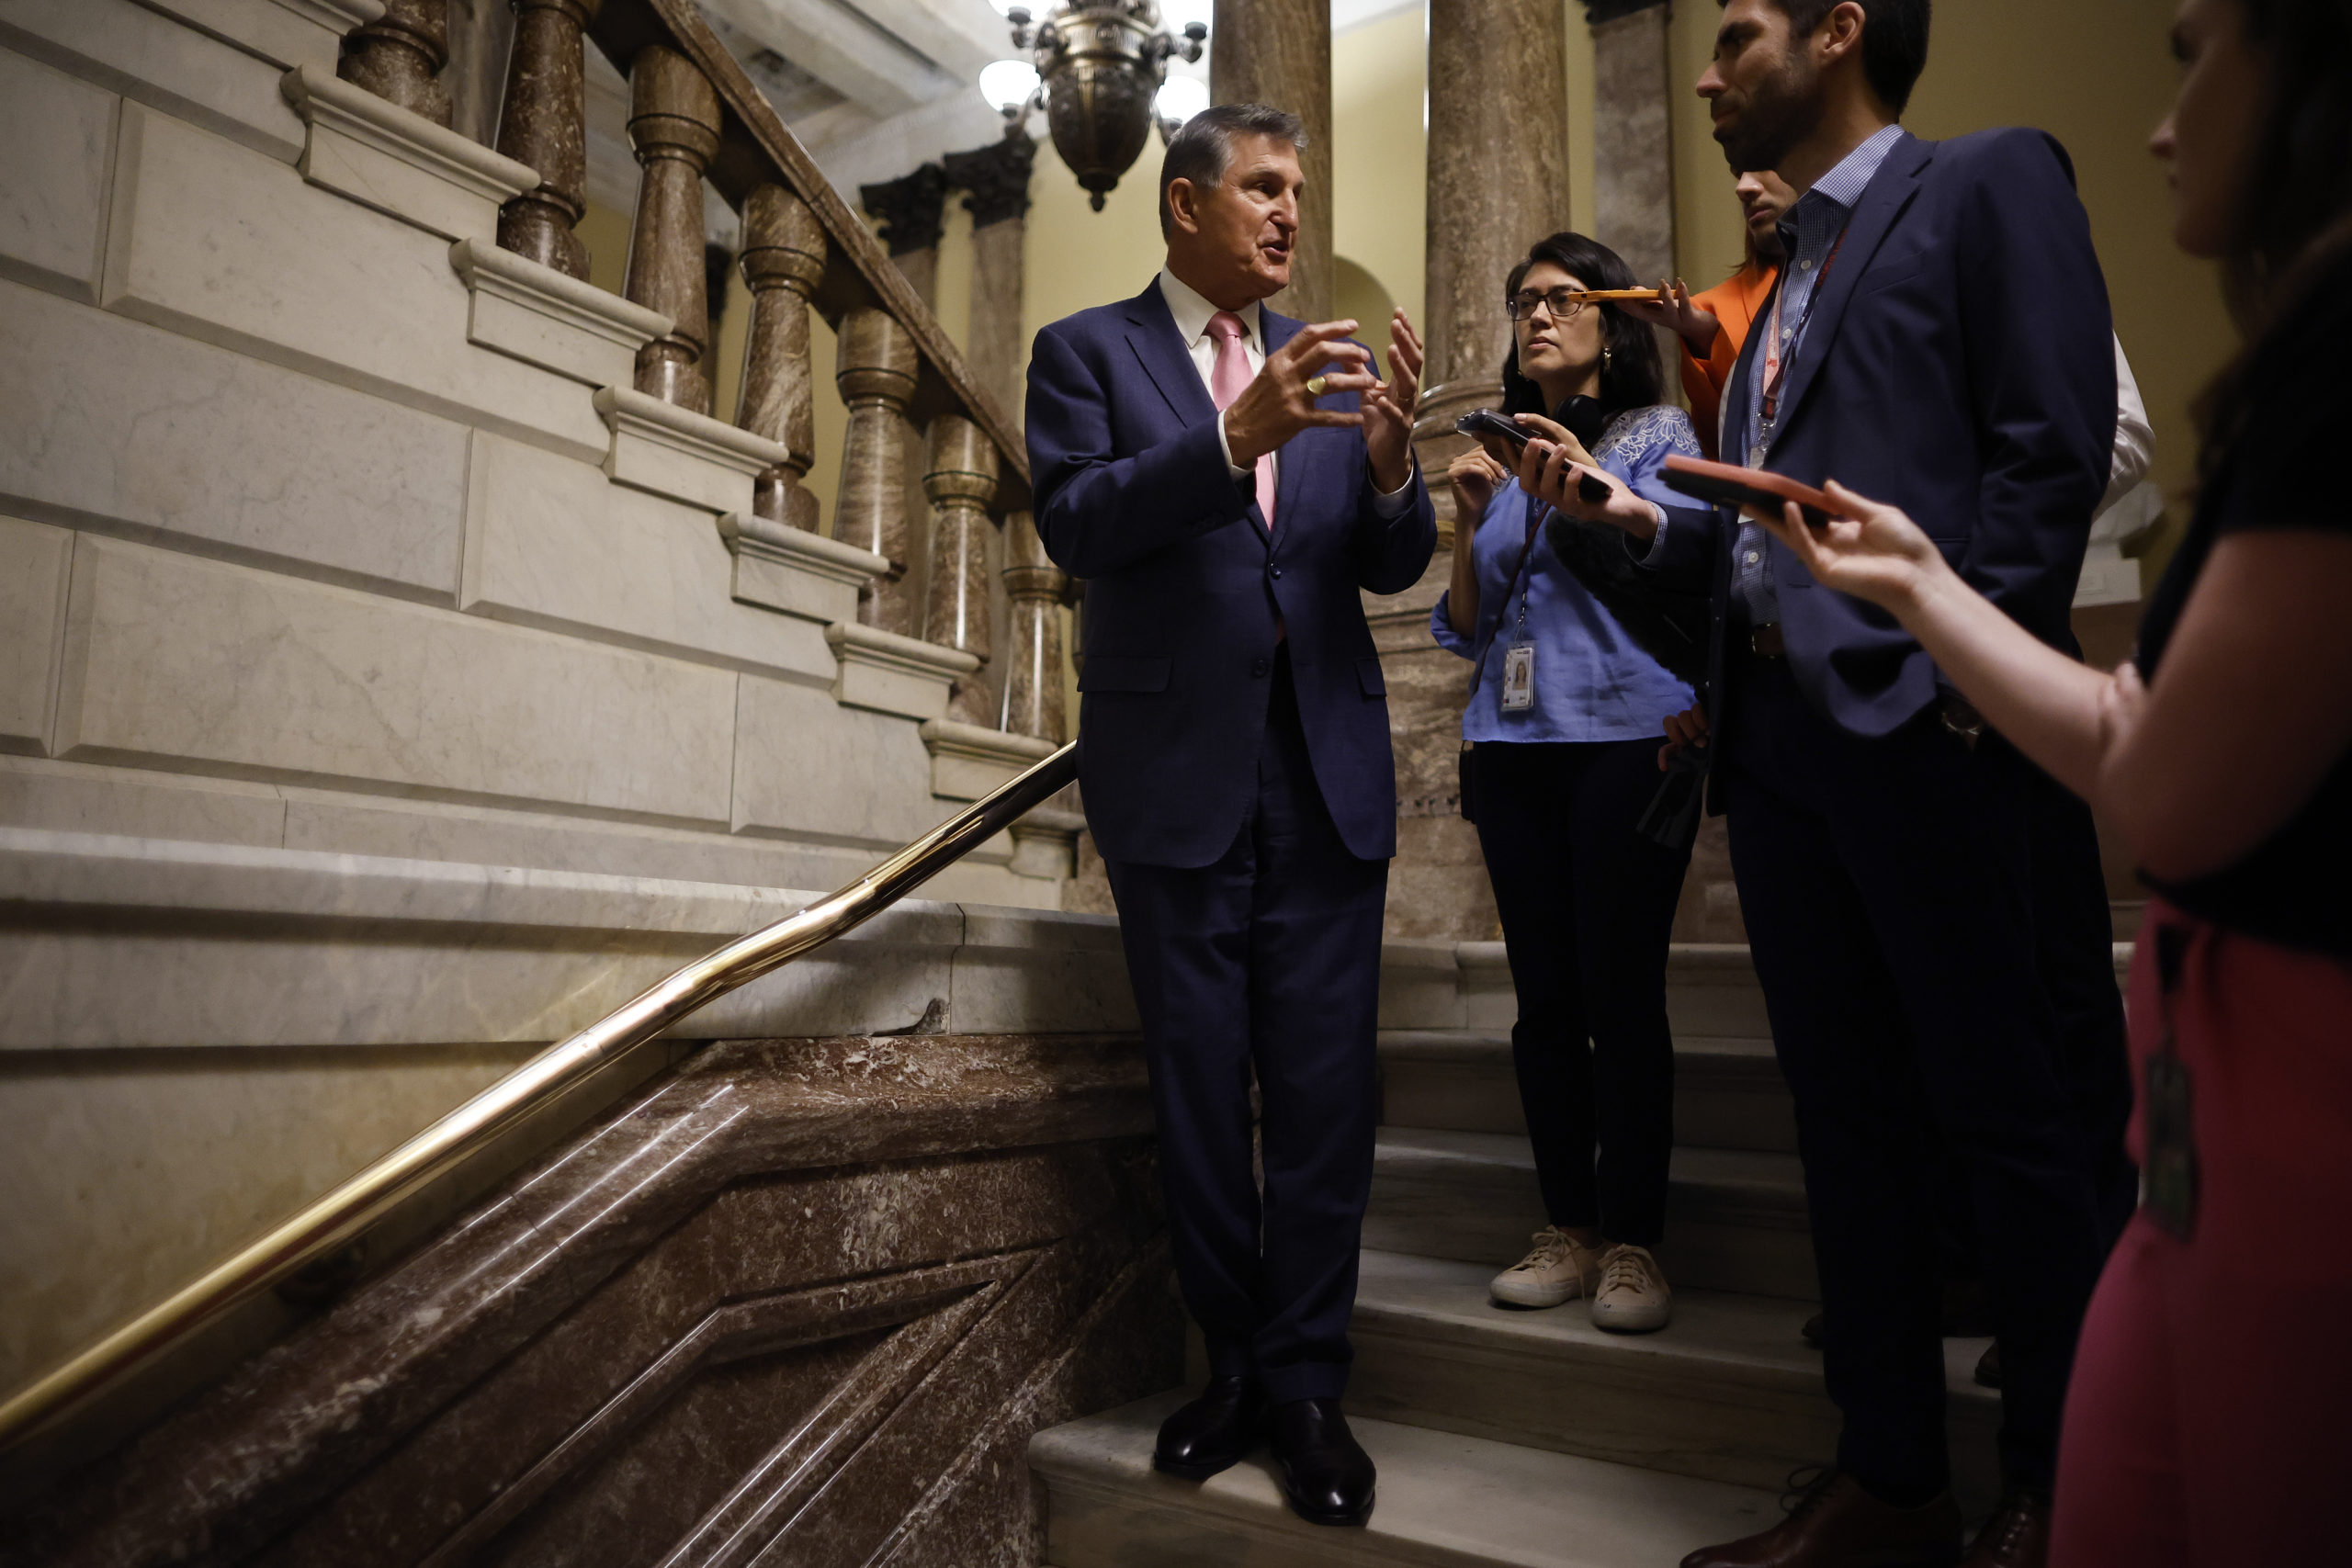 WASHINGTON, DC - JUNE 01: Sen. Joe Manchin (D-WV) (L) talks with reporters in between votes at the U.S. Capitol on June 01, 2023 in Washington, DC. The Senate has taken up legislation to raise the debt limit and avoid a default that was negotiated between House Republicans and the White House. (Photo by Chip Somodevilla/Getty Images)